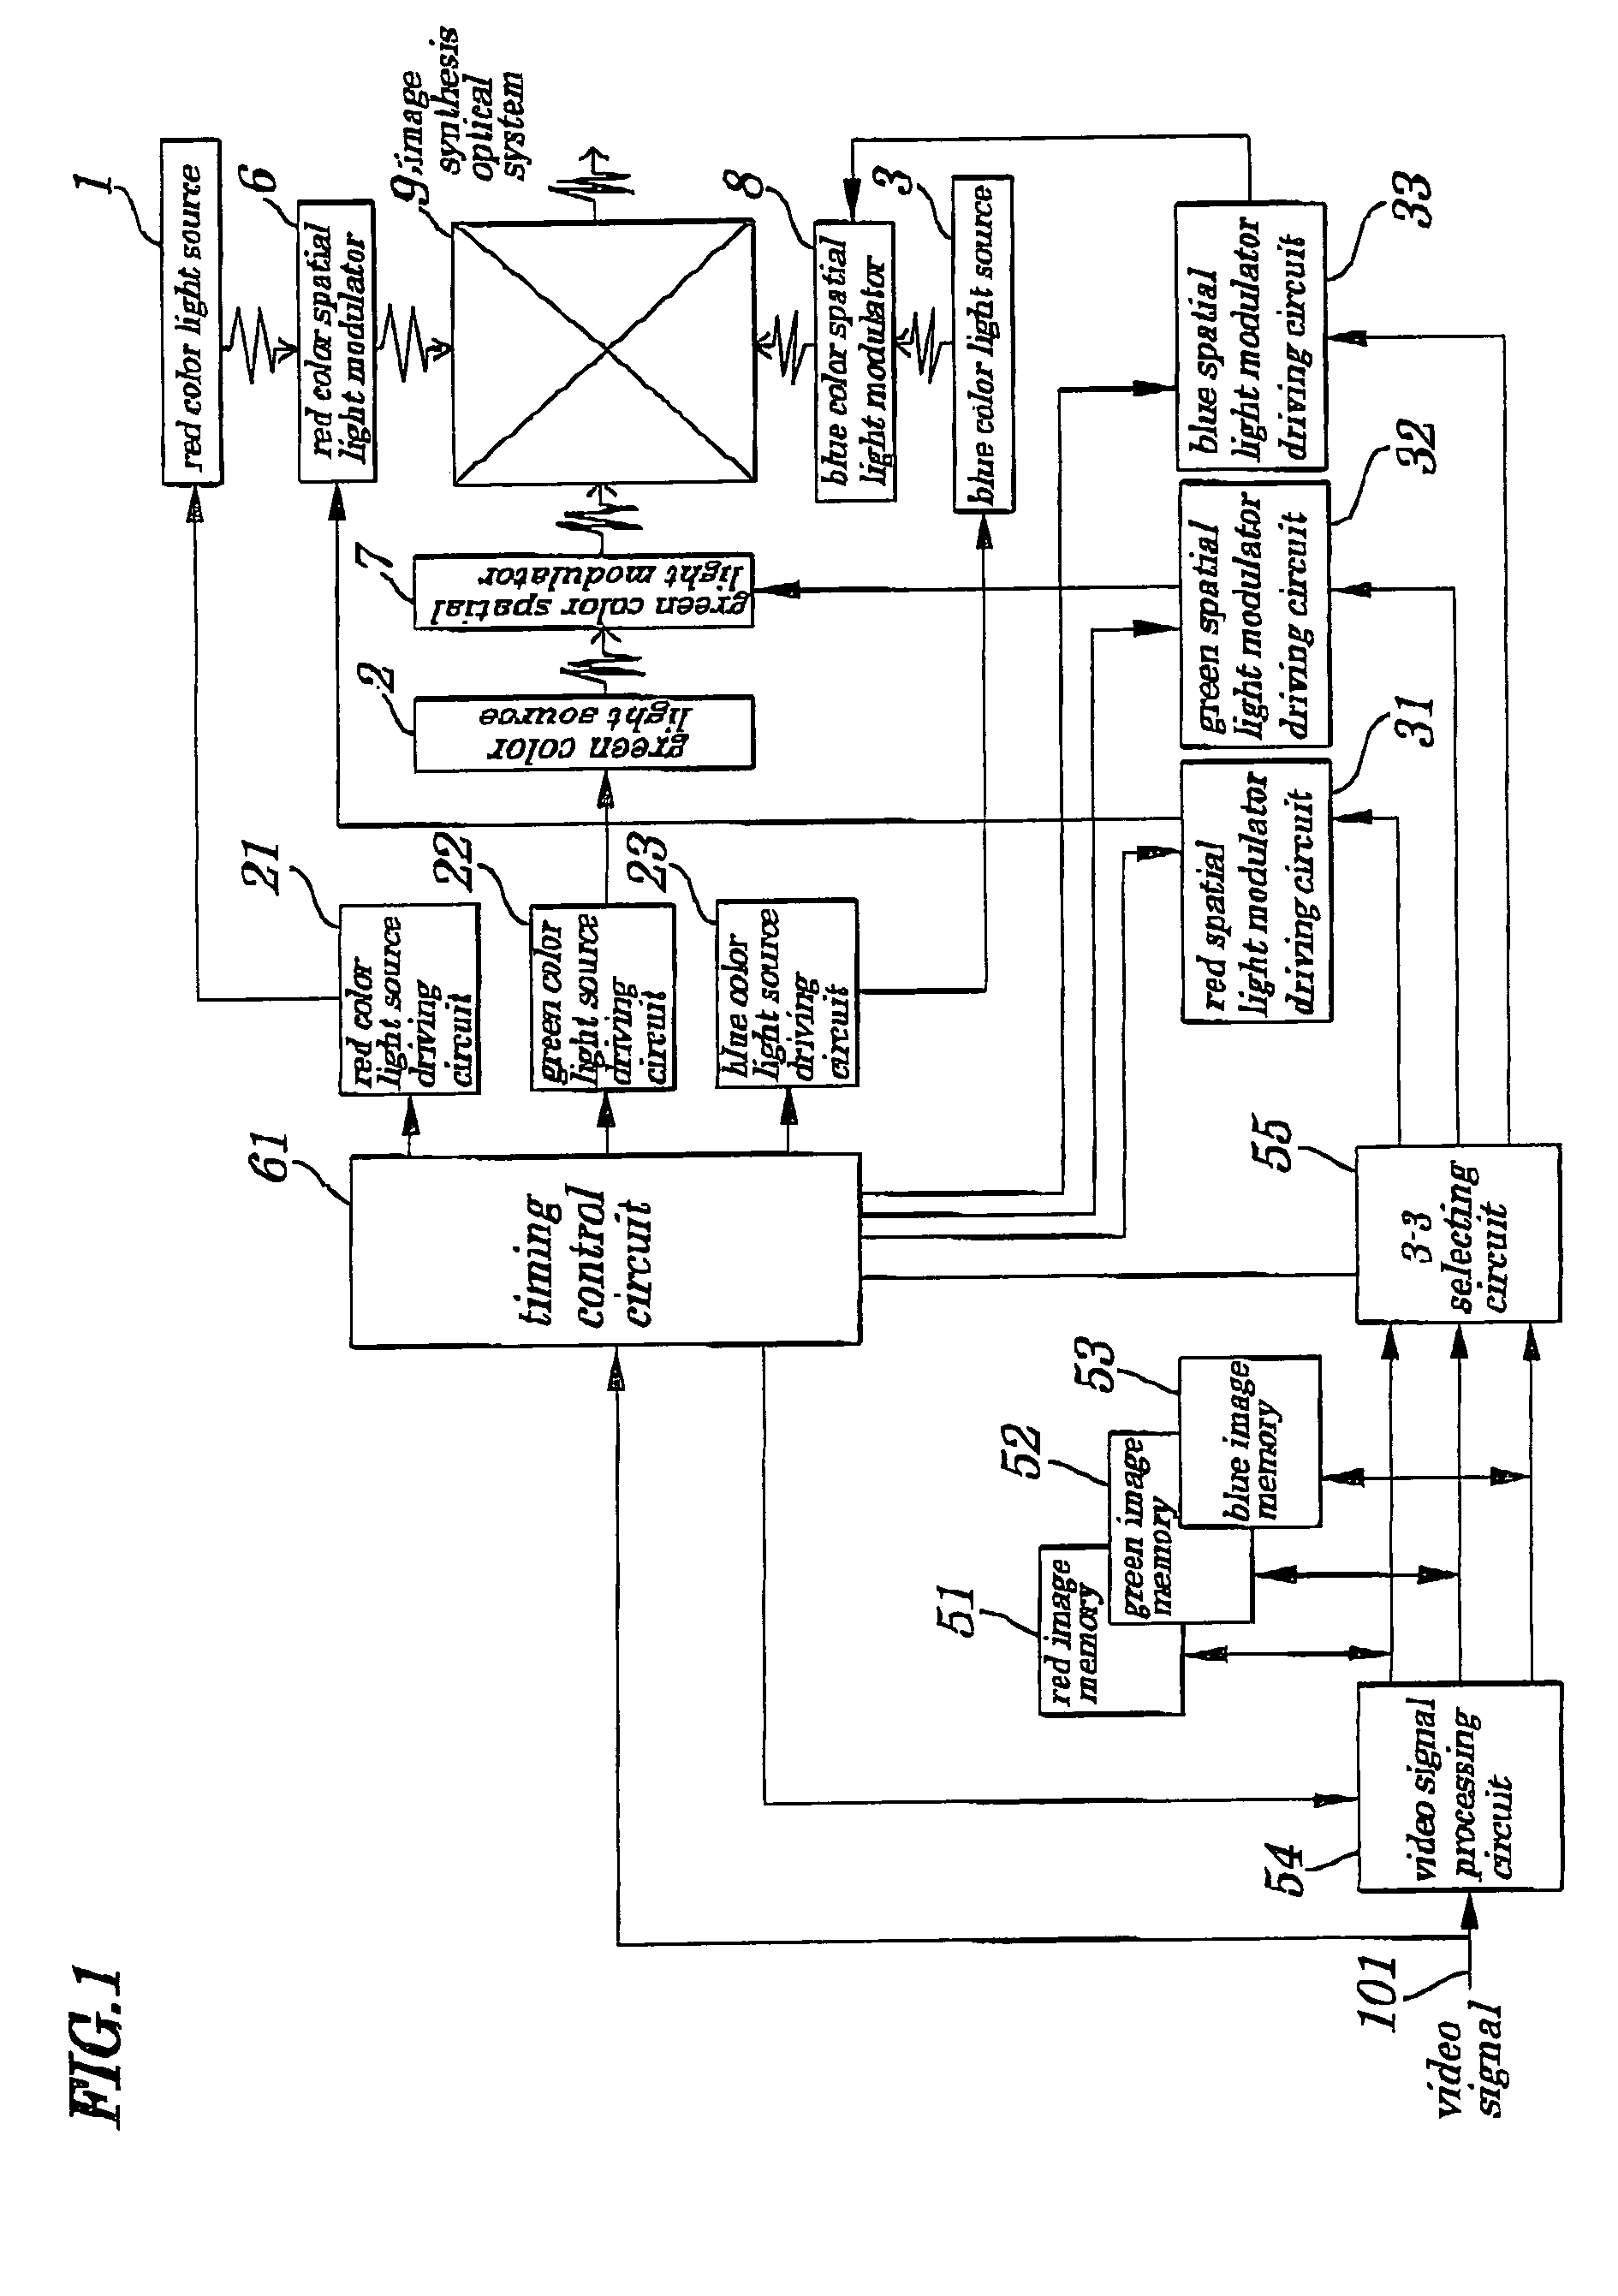 Video display device with spatial light modulator